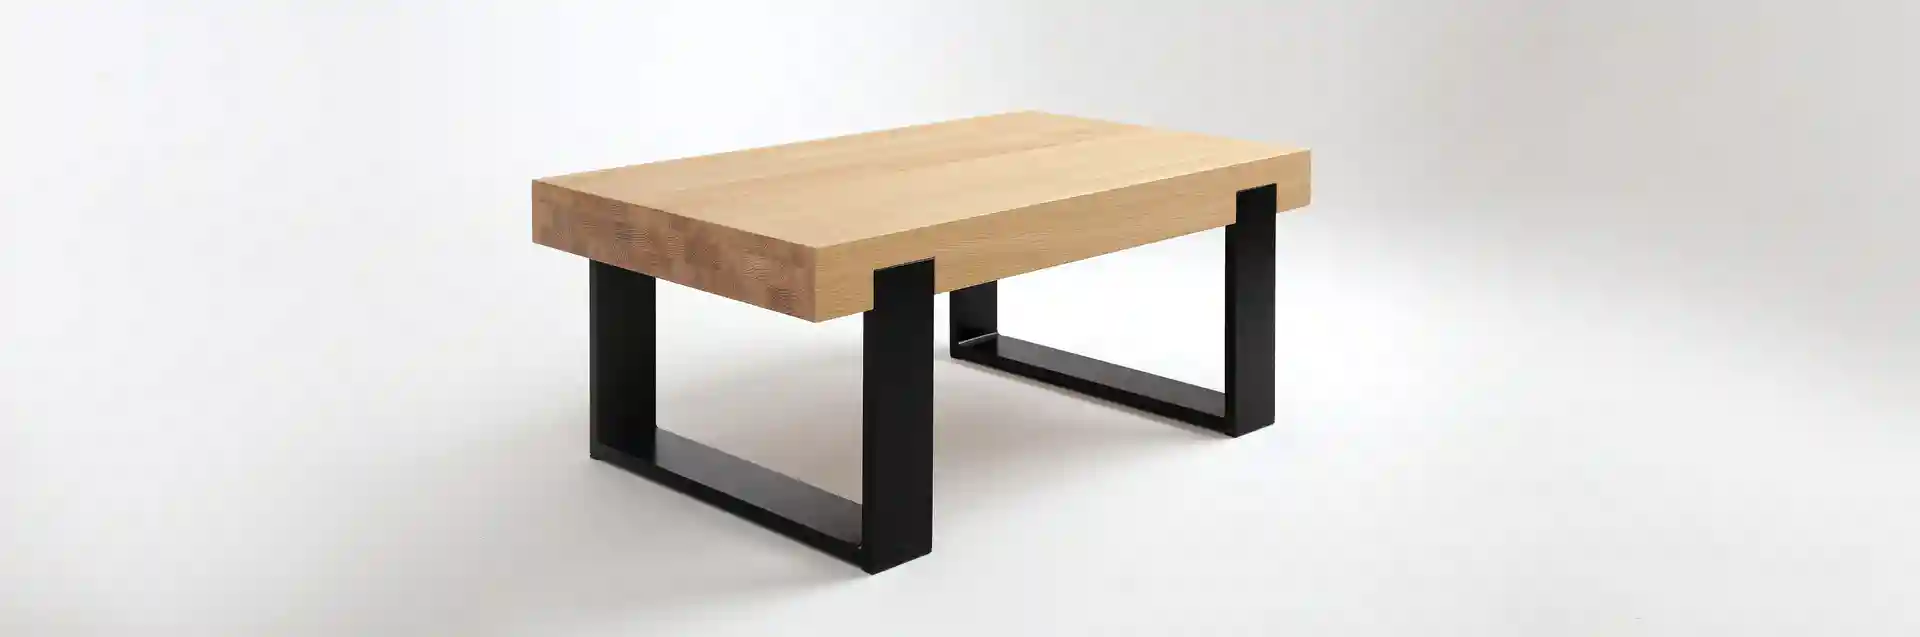 FRAME Small Table